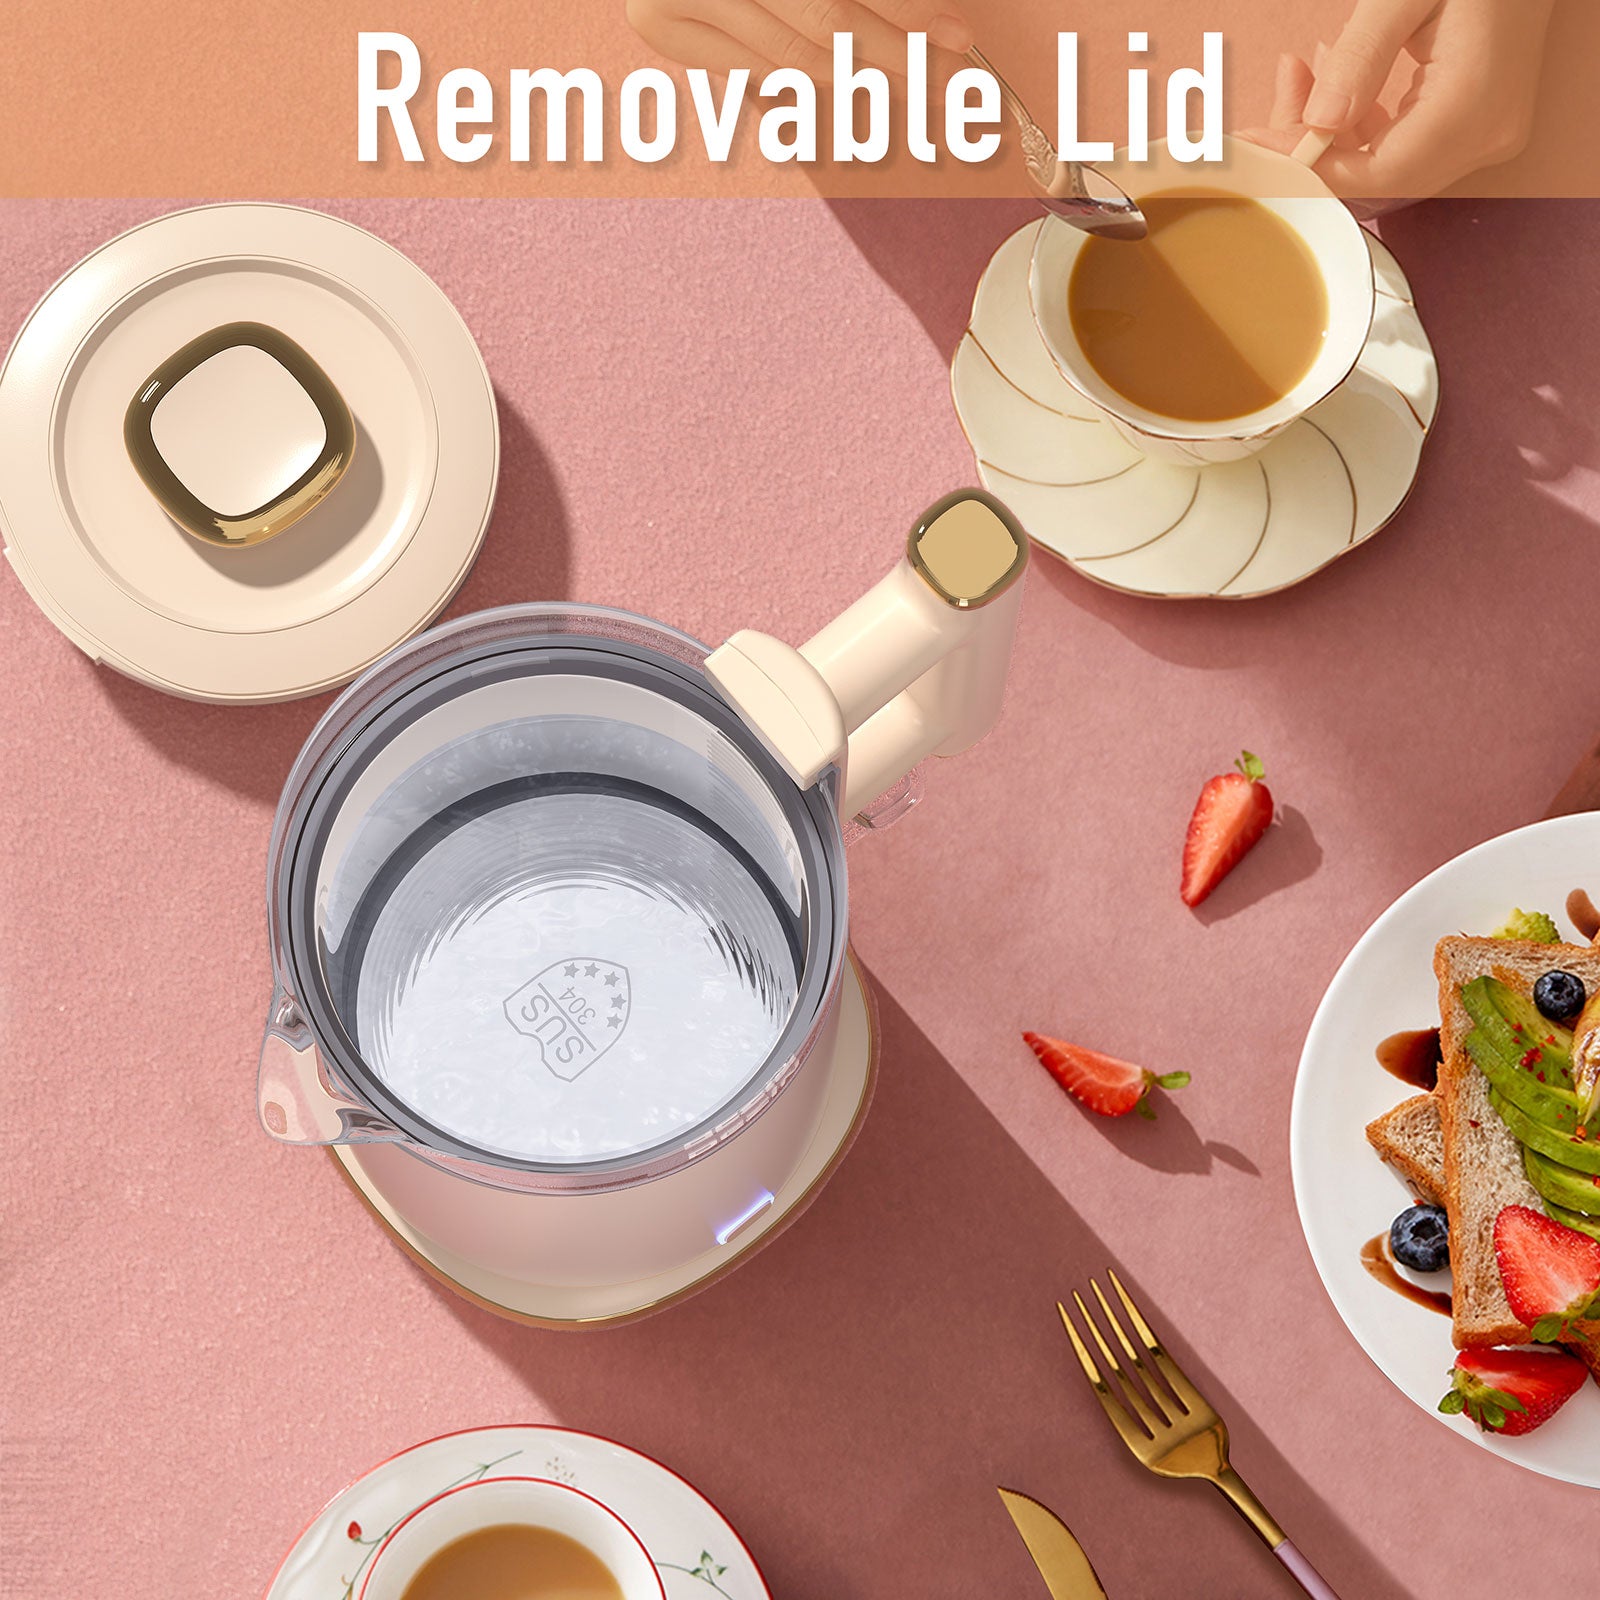 Double Wall Hot Water Electric Kettle Price Low Stainless Steel